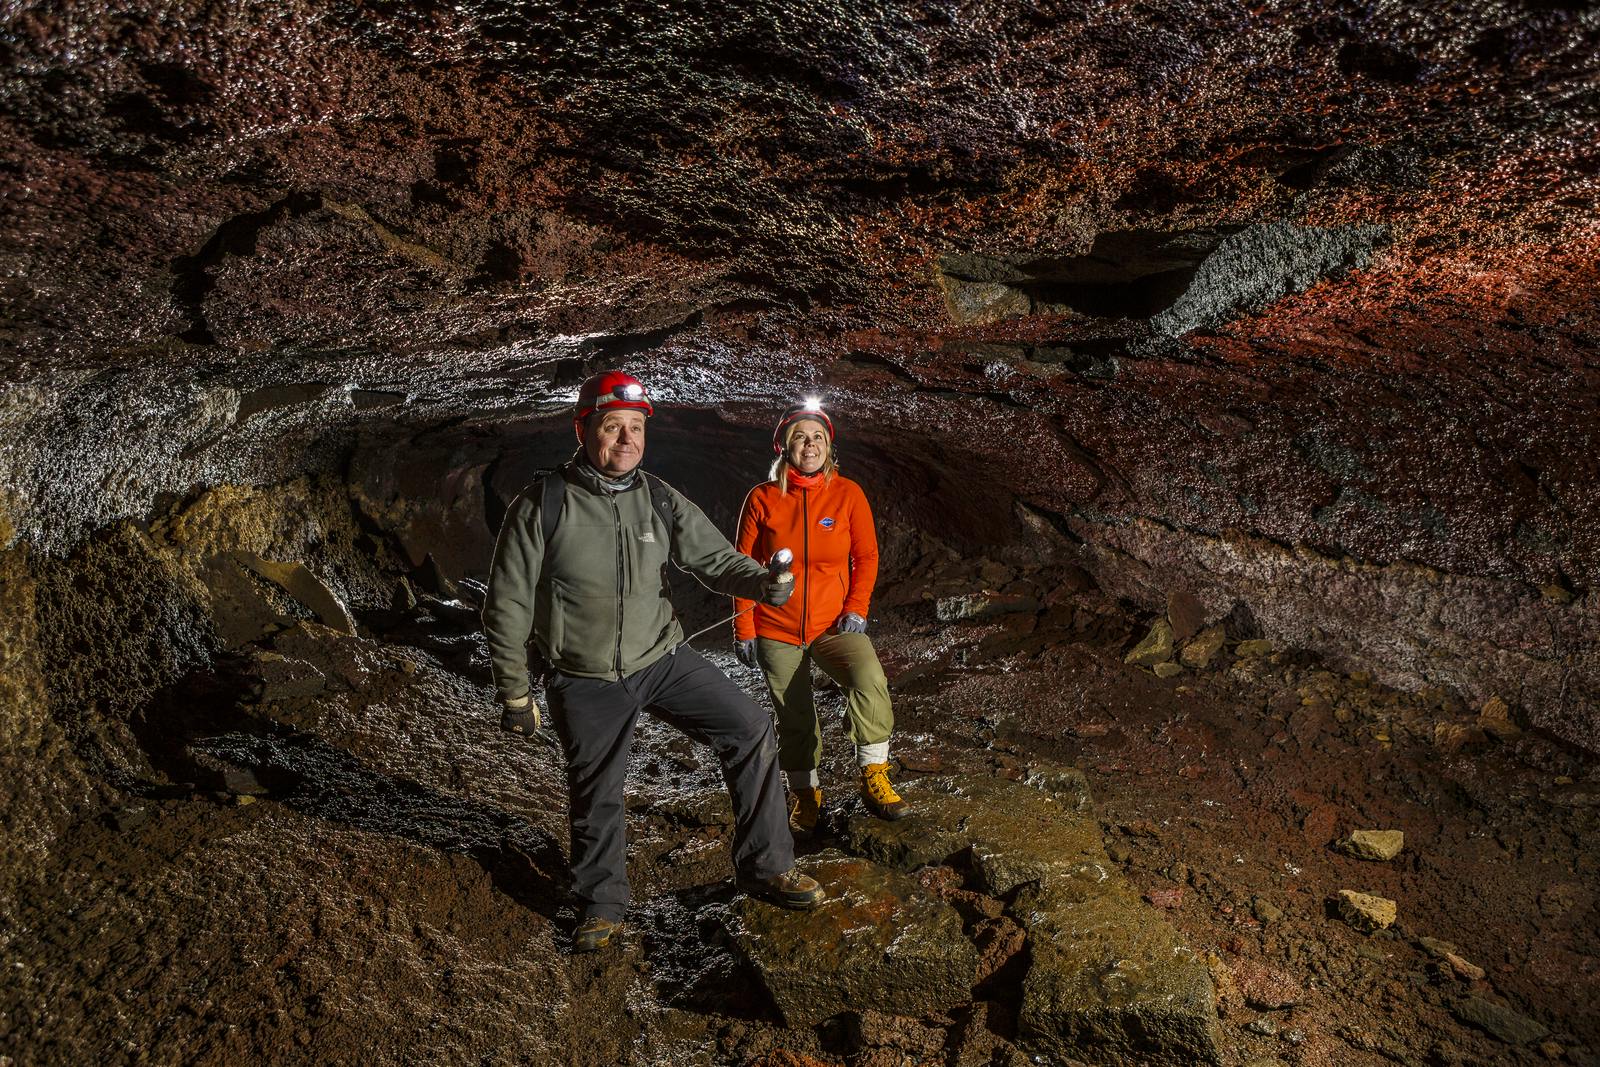 Two people wearing helmets and headlamps standing inside a cave